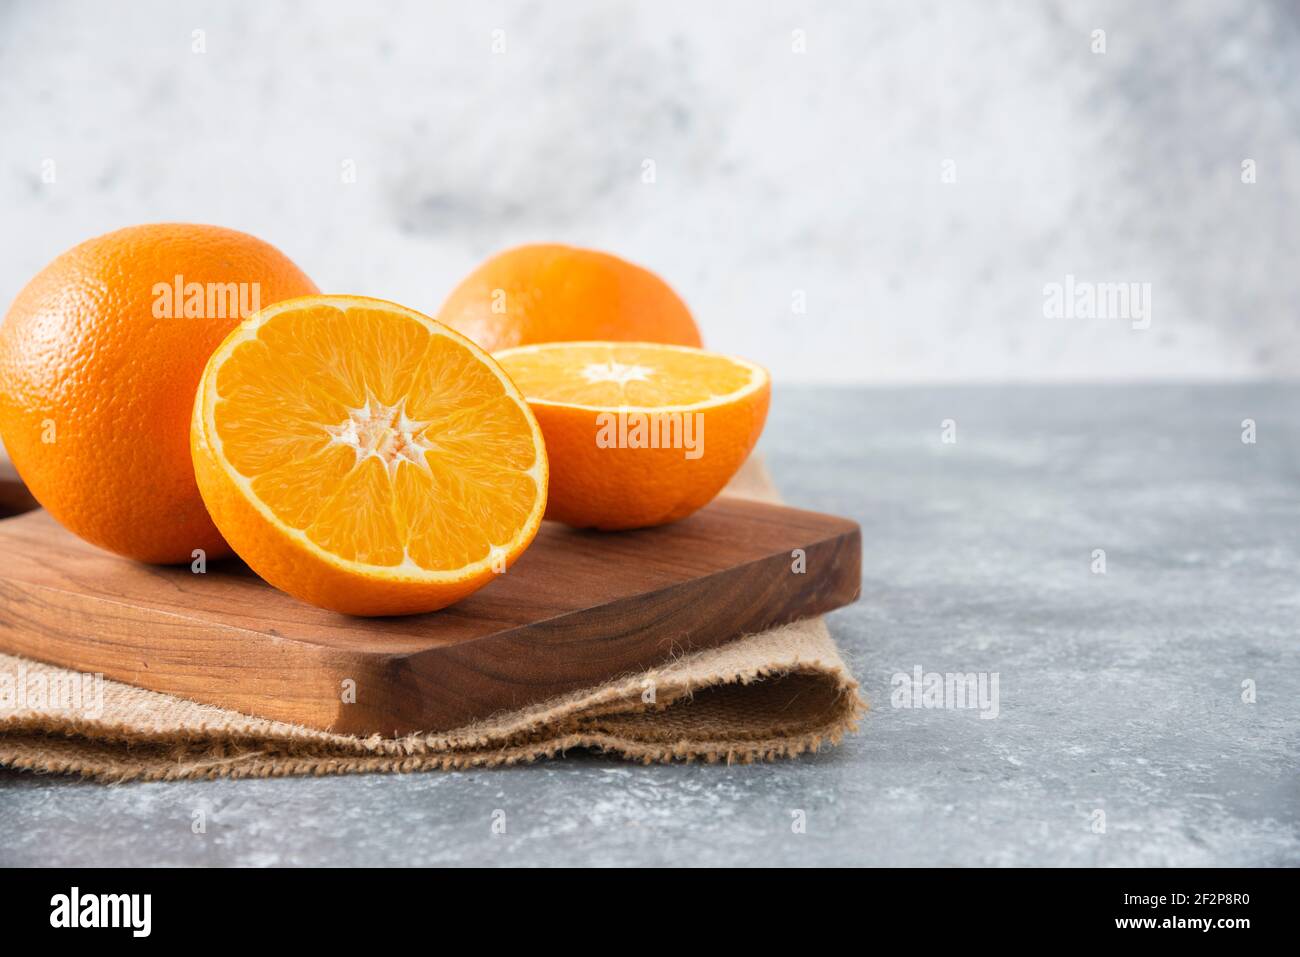 A wooden board full of juicy slices of orange fruit on stone background Stock Photo